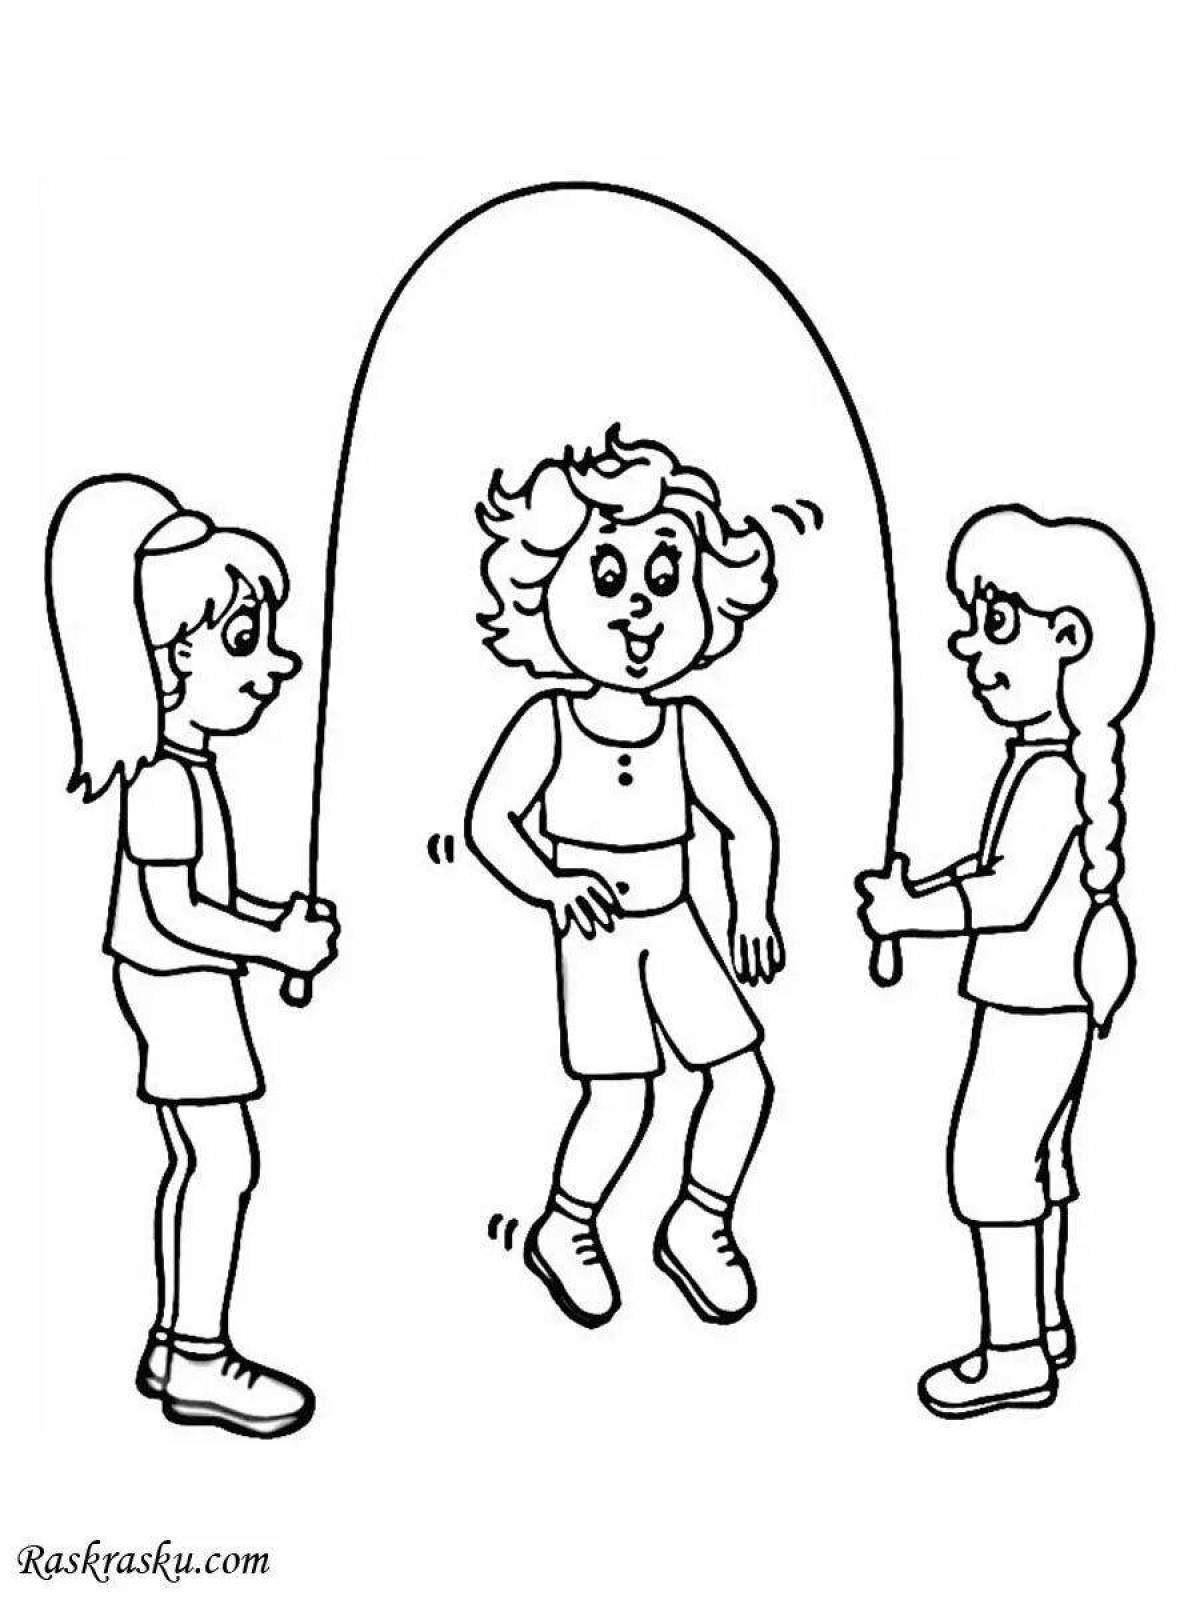 Let's tempting coloring page